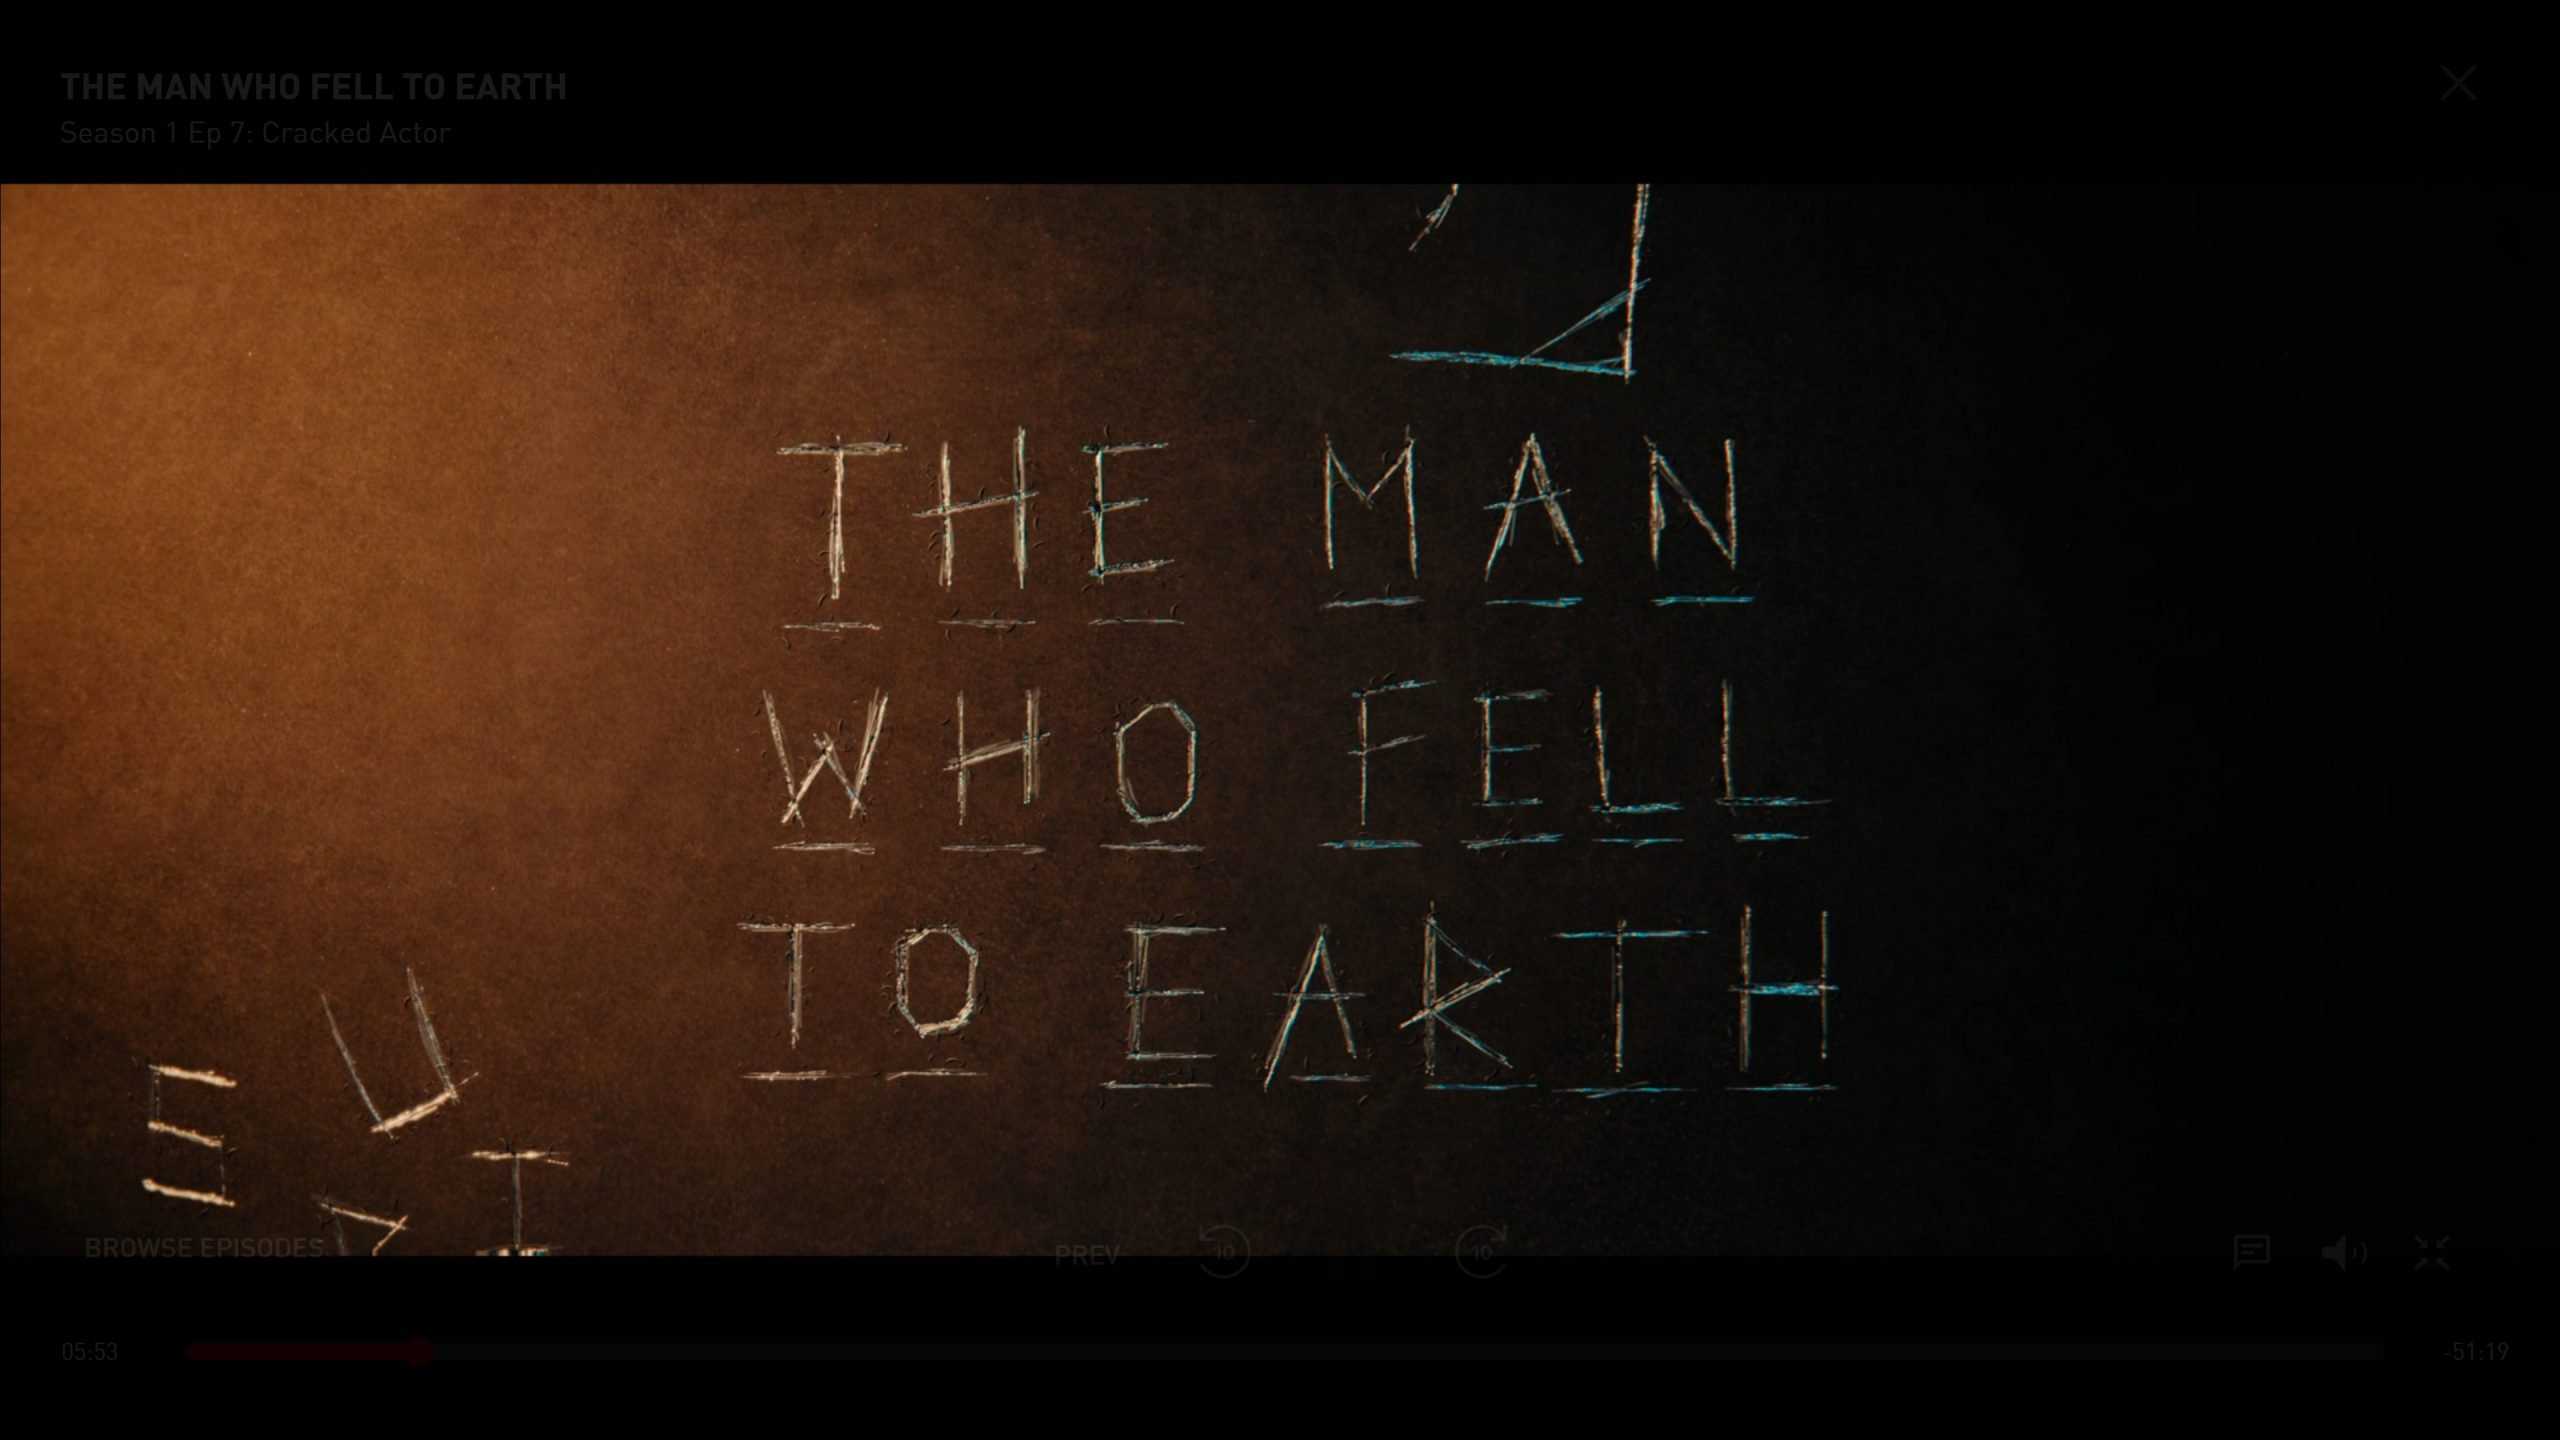 Title Card - The Man Who Fell To Earth Season 1 Episode 7 “Cracked Actor”